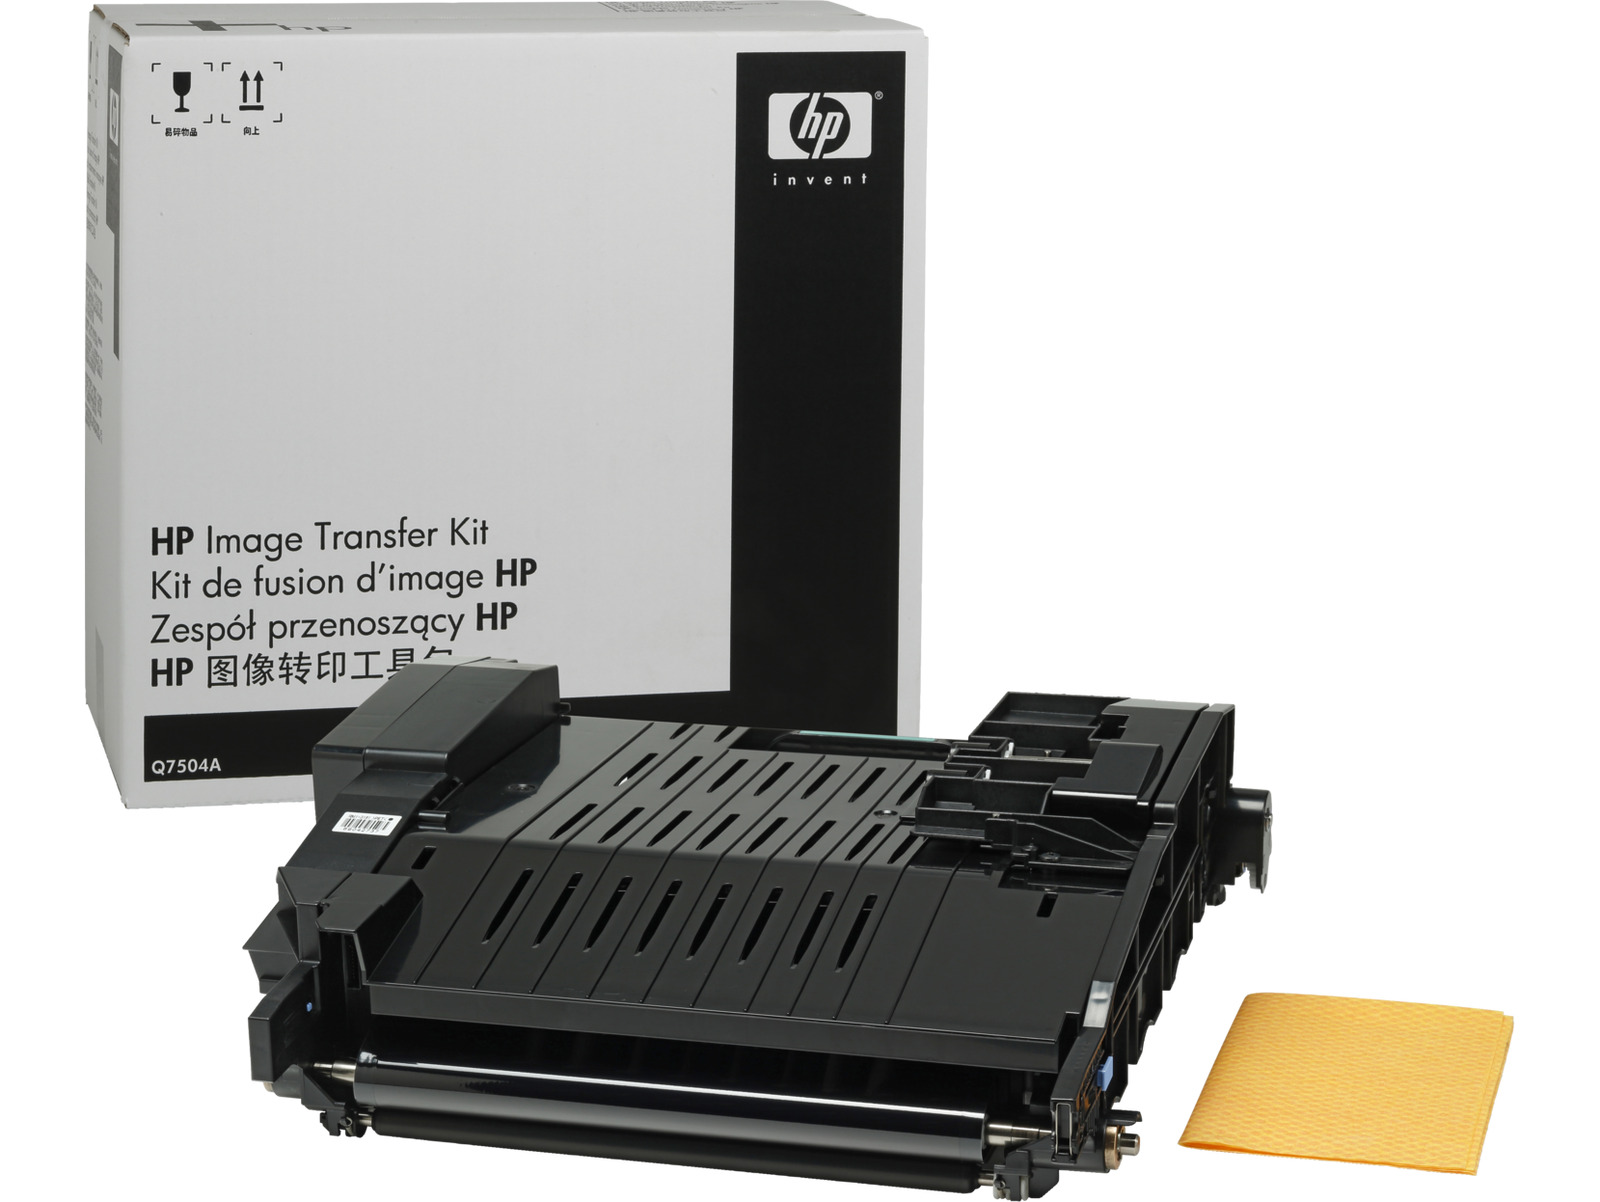 HP Color LaserJet Q7504A Image Transfer Kit, Up to 120,000 pages, Q7504A